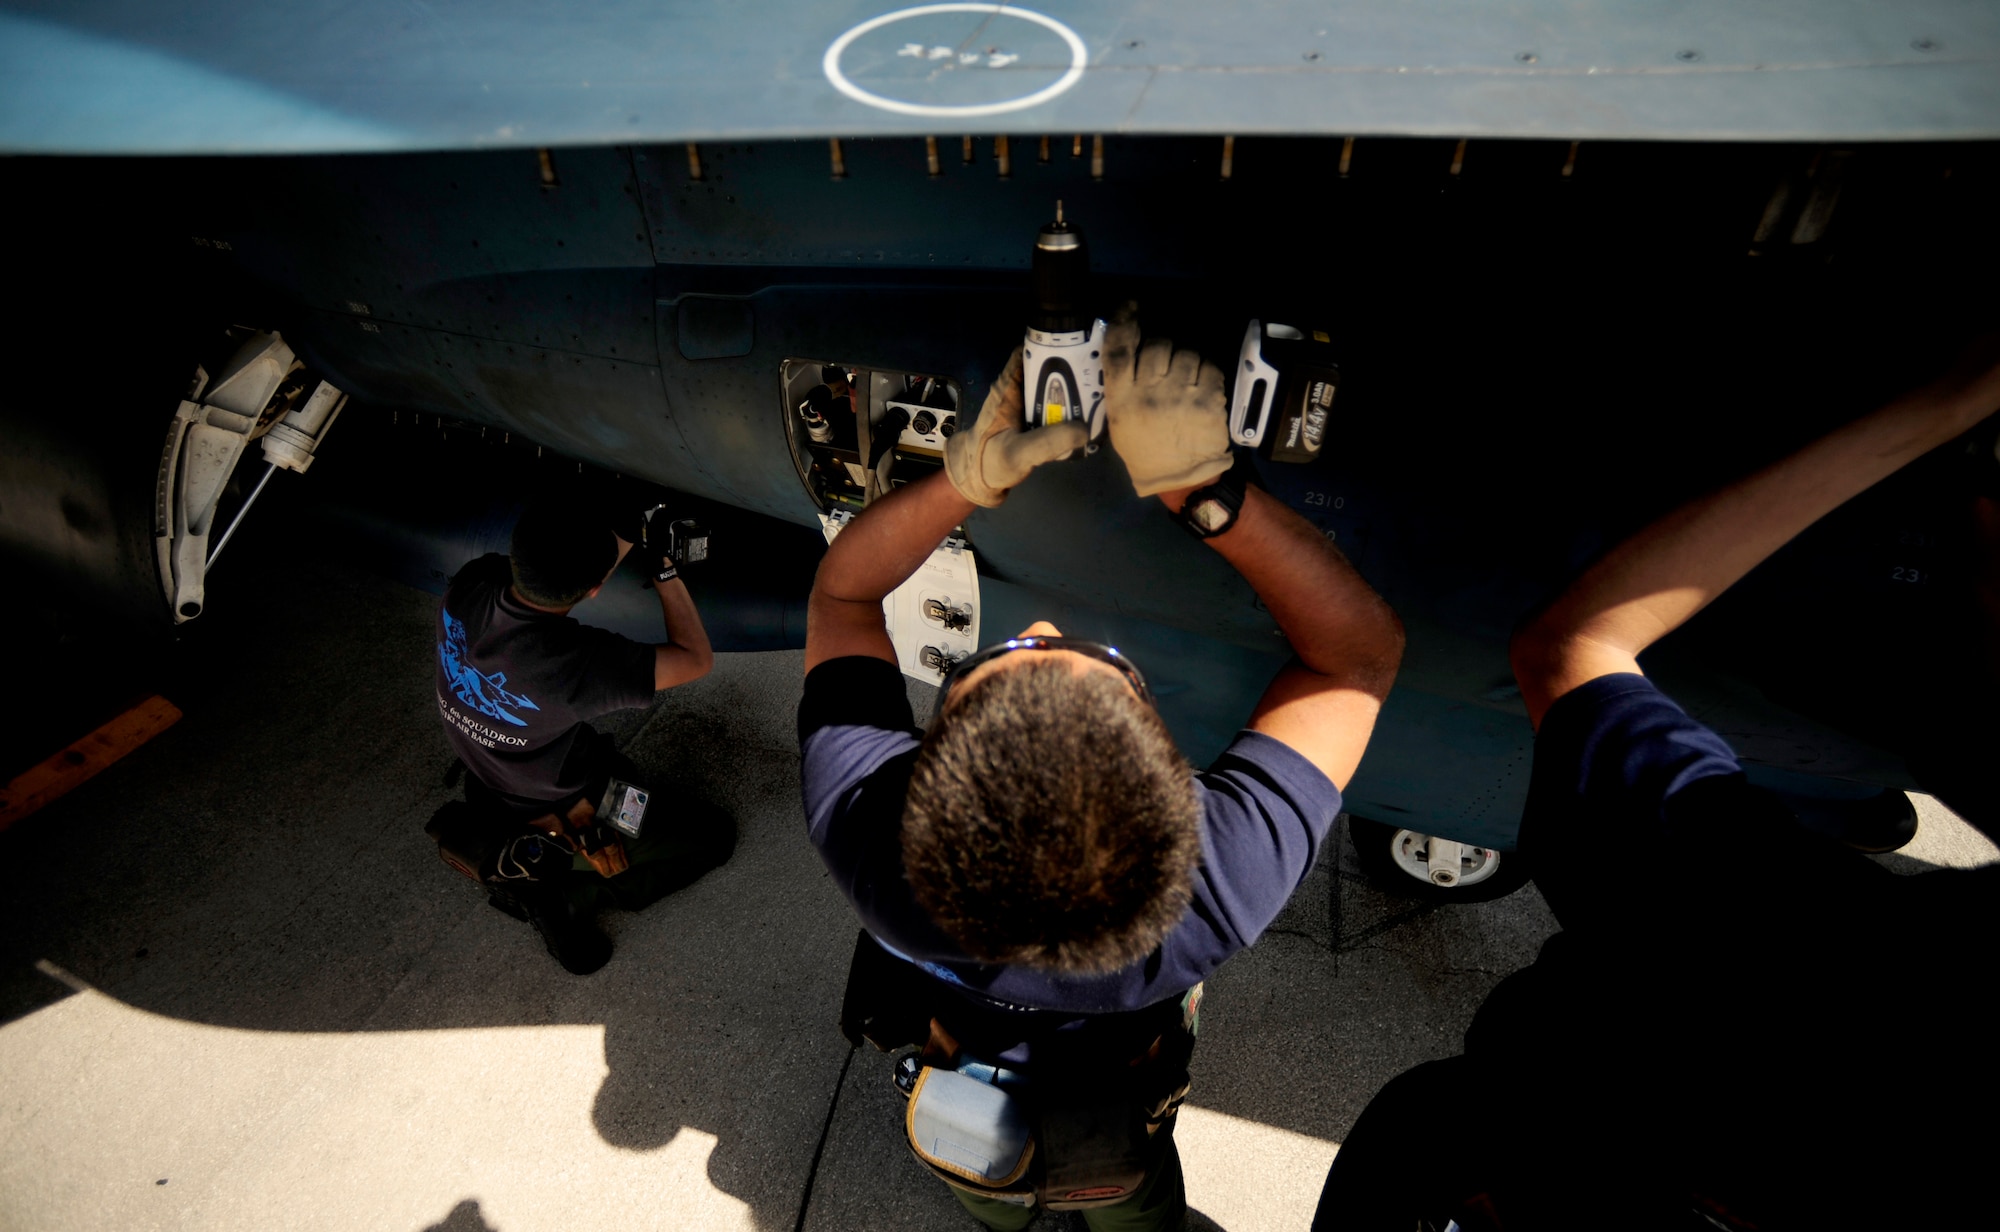 Japanese crew members of the 8th Combat Wing, 6th TF Squadron, Tsuiki AB, Japan, prepare their F2 for ammunitions during Cope North on Andersen Air Force Base, Guam on Feb. 9, 2010. The United States Air Force and the Japanese Air Self-Defense Force conduct Cope North annually to increase combat readiness and interoperability, concentrating on coordination and evaluation of air tactics, techniques, and procedures. The ability for both nations to work together increases their preparedness to support real-world contingencies.
(USAF photo by Staff Sgt. Andy M. Kin)
